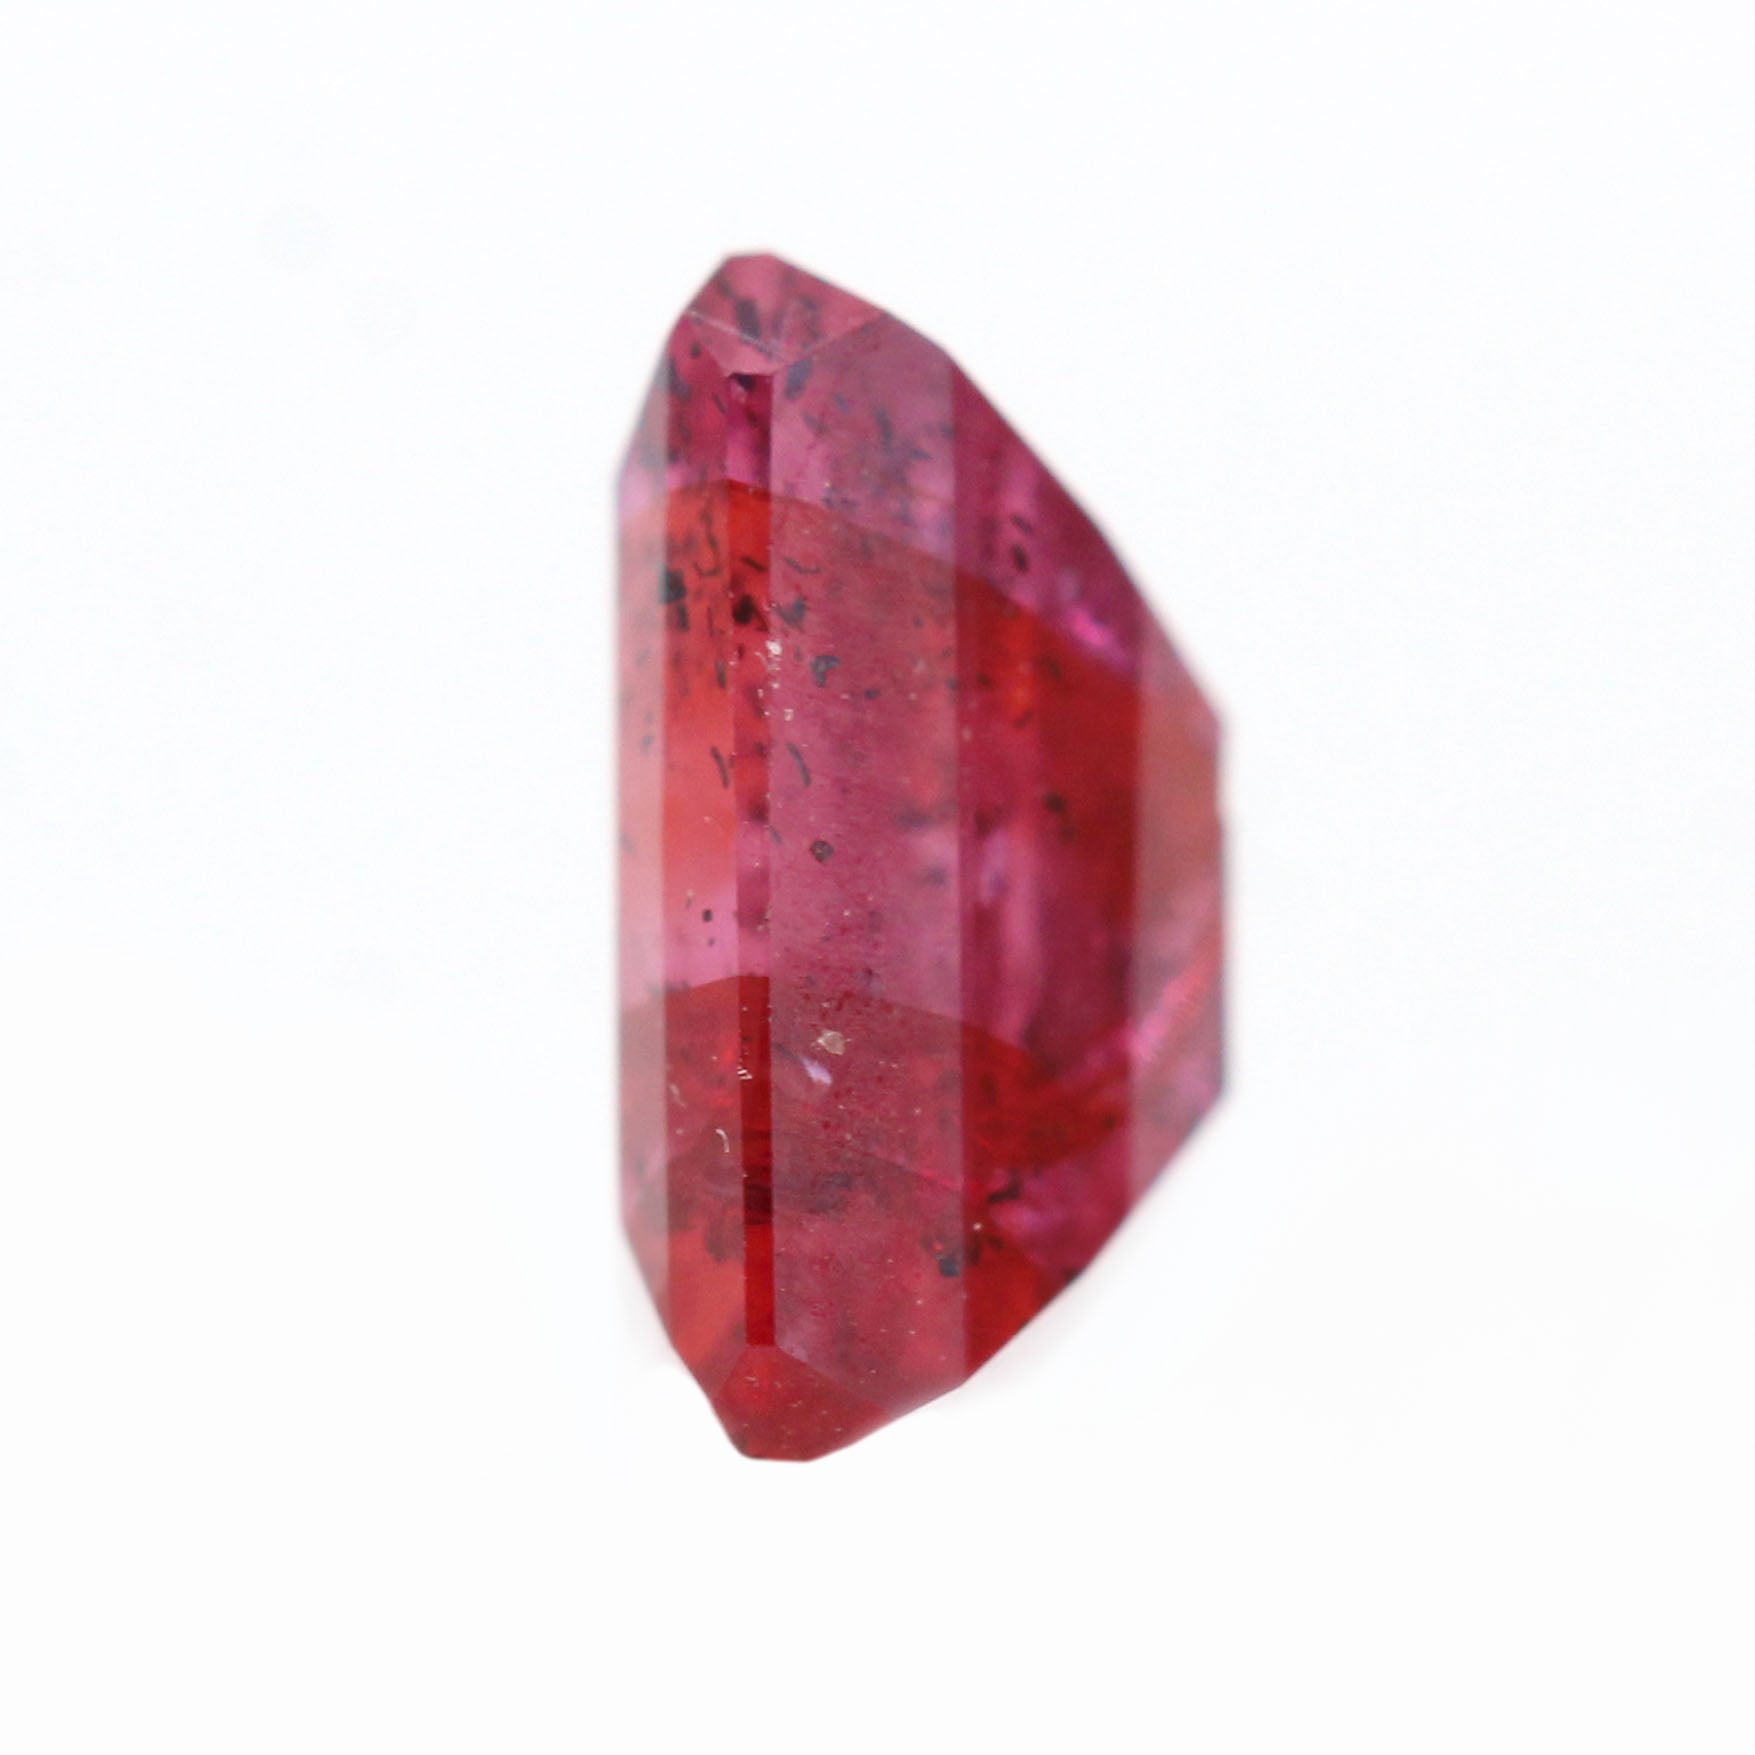 1.37 Carat Emerald Cut Pinkish Red Madagascar Ruby for Custom Work - Inventory Code RES137 - Midwinter Co. Alternative Bridal Rings and Modern Fine Jewelry